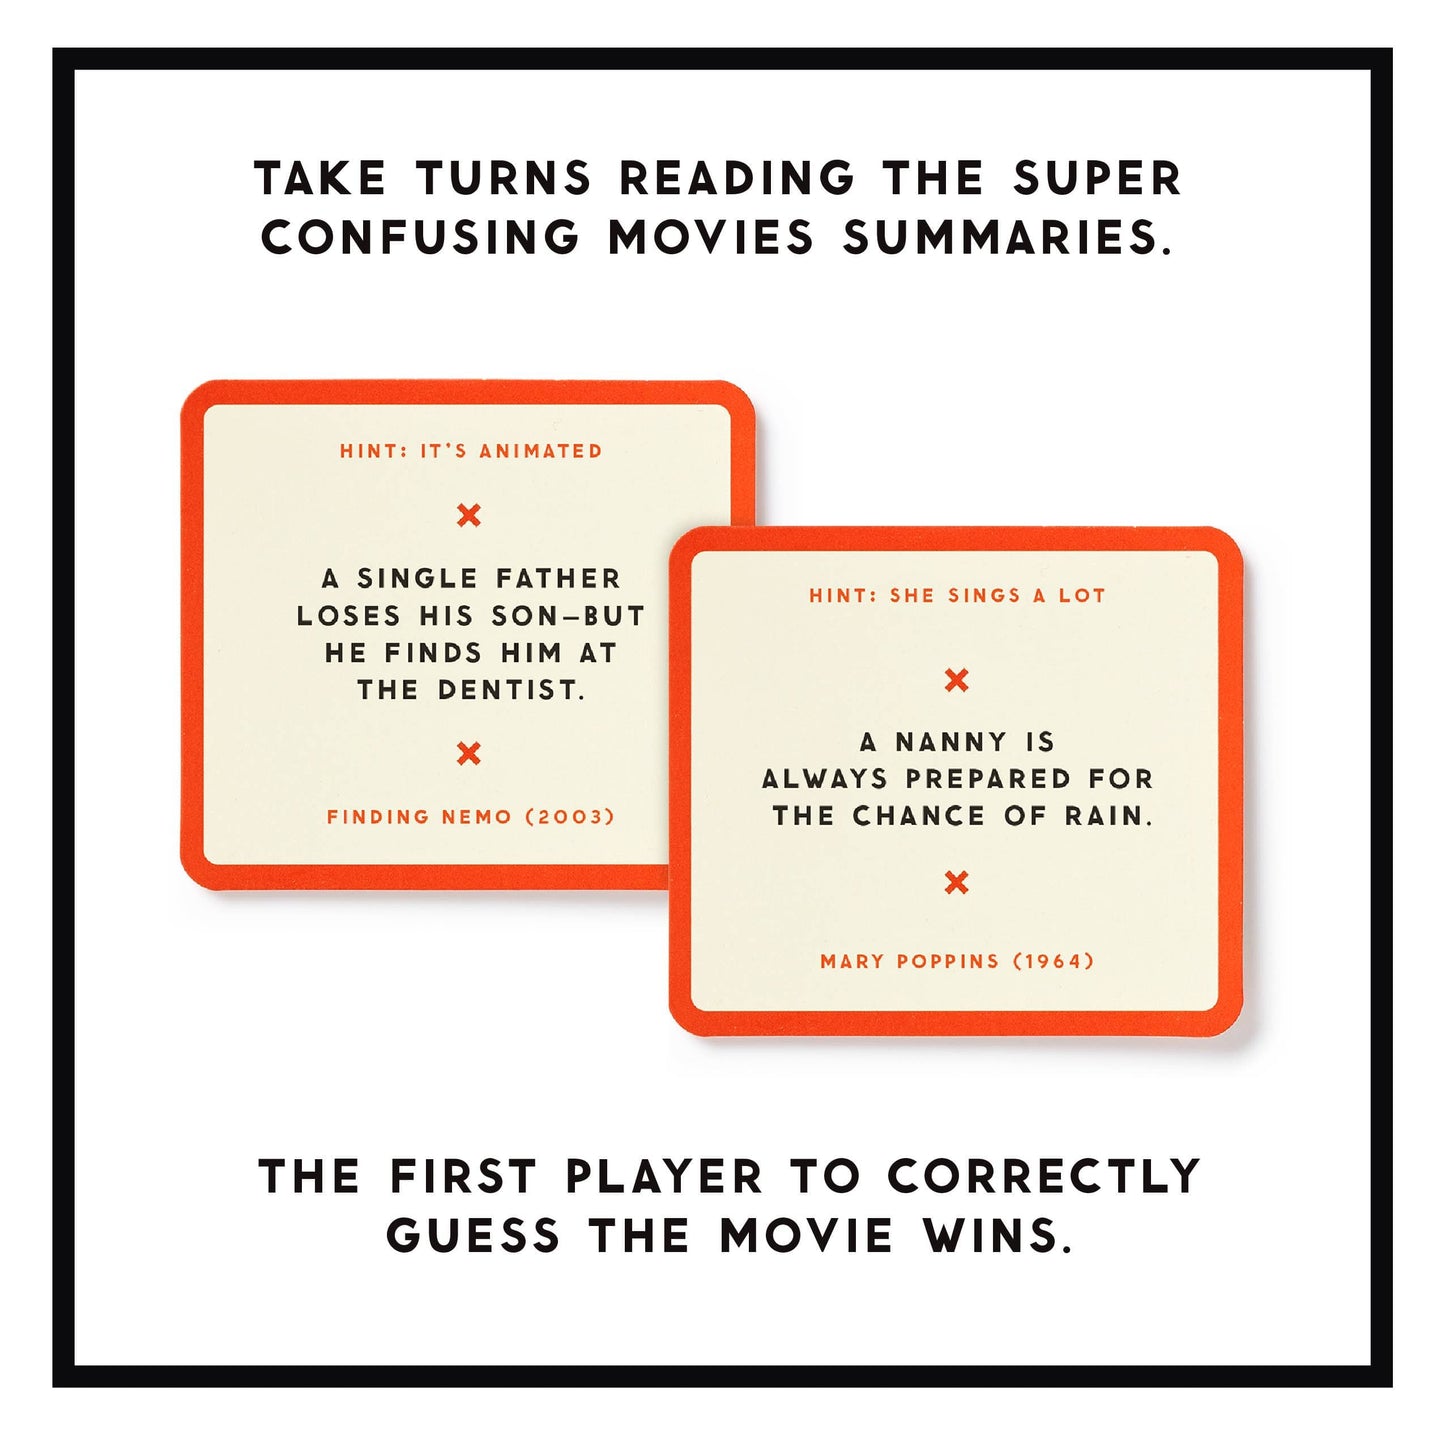 Poorly Explained Movies Game